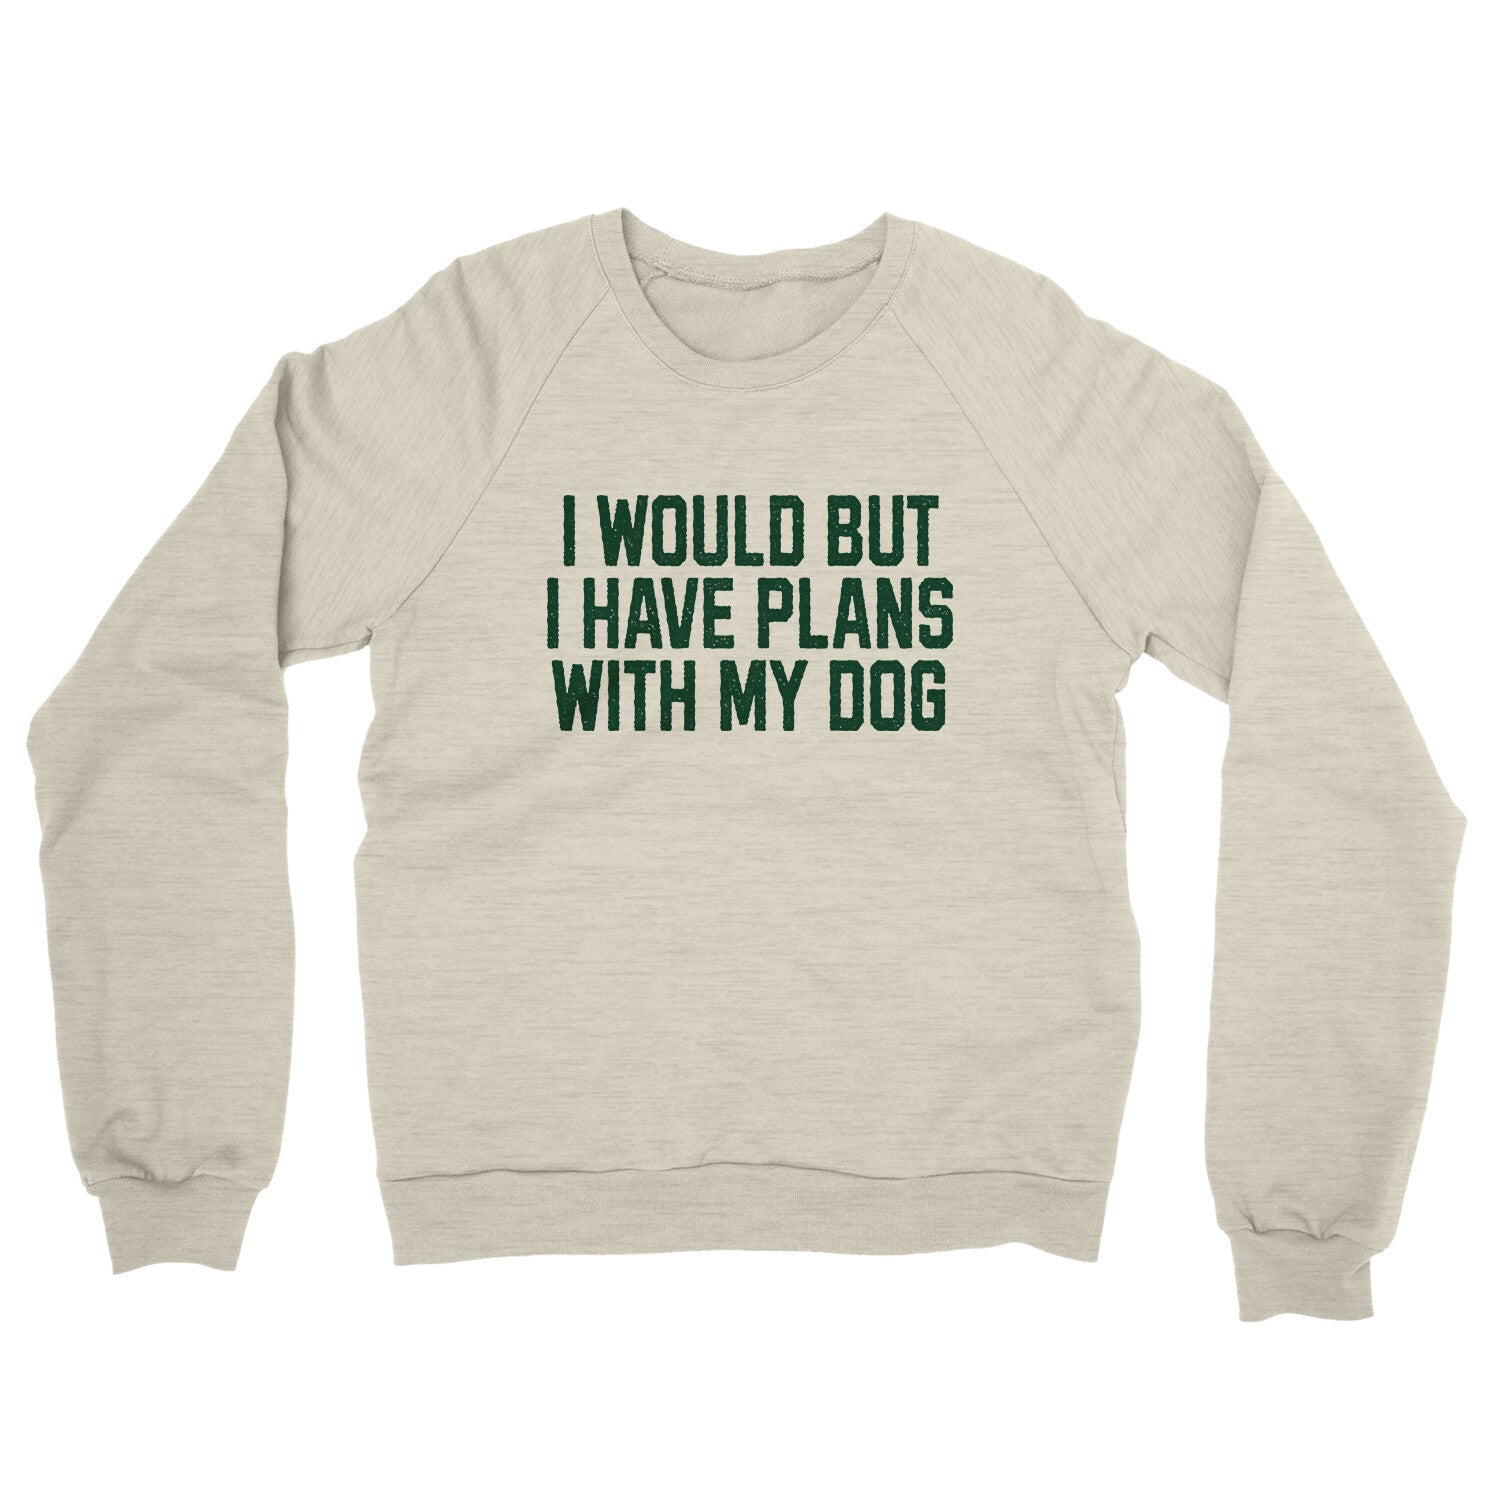 I Would but I Have Plans with My Dog in Heather Oatmeal Color